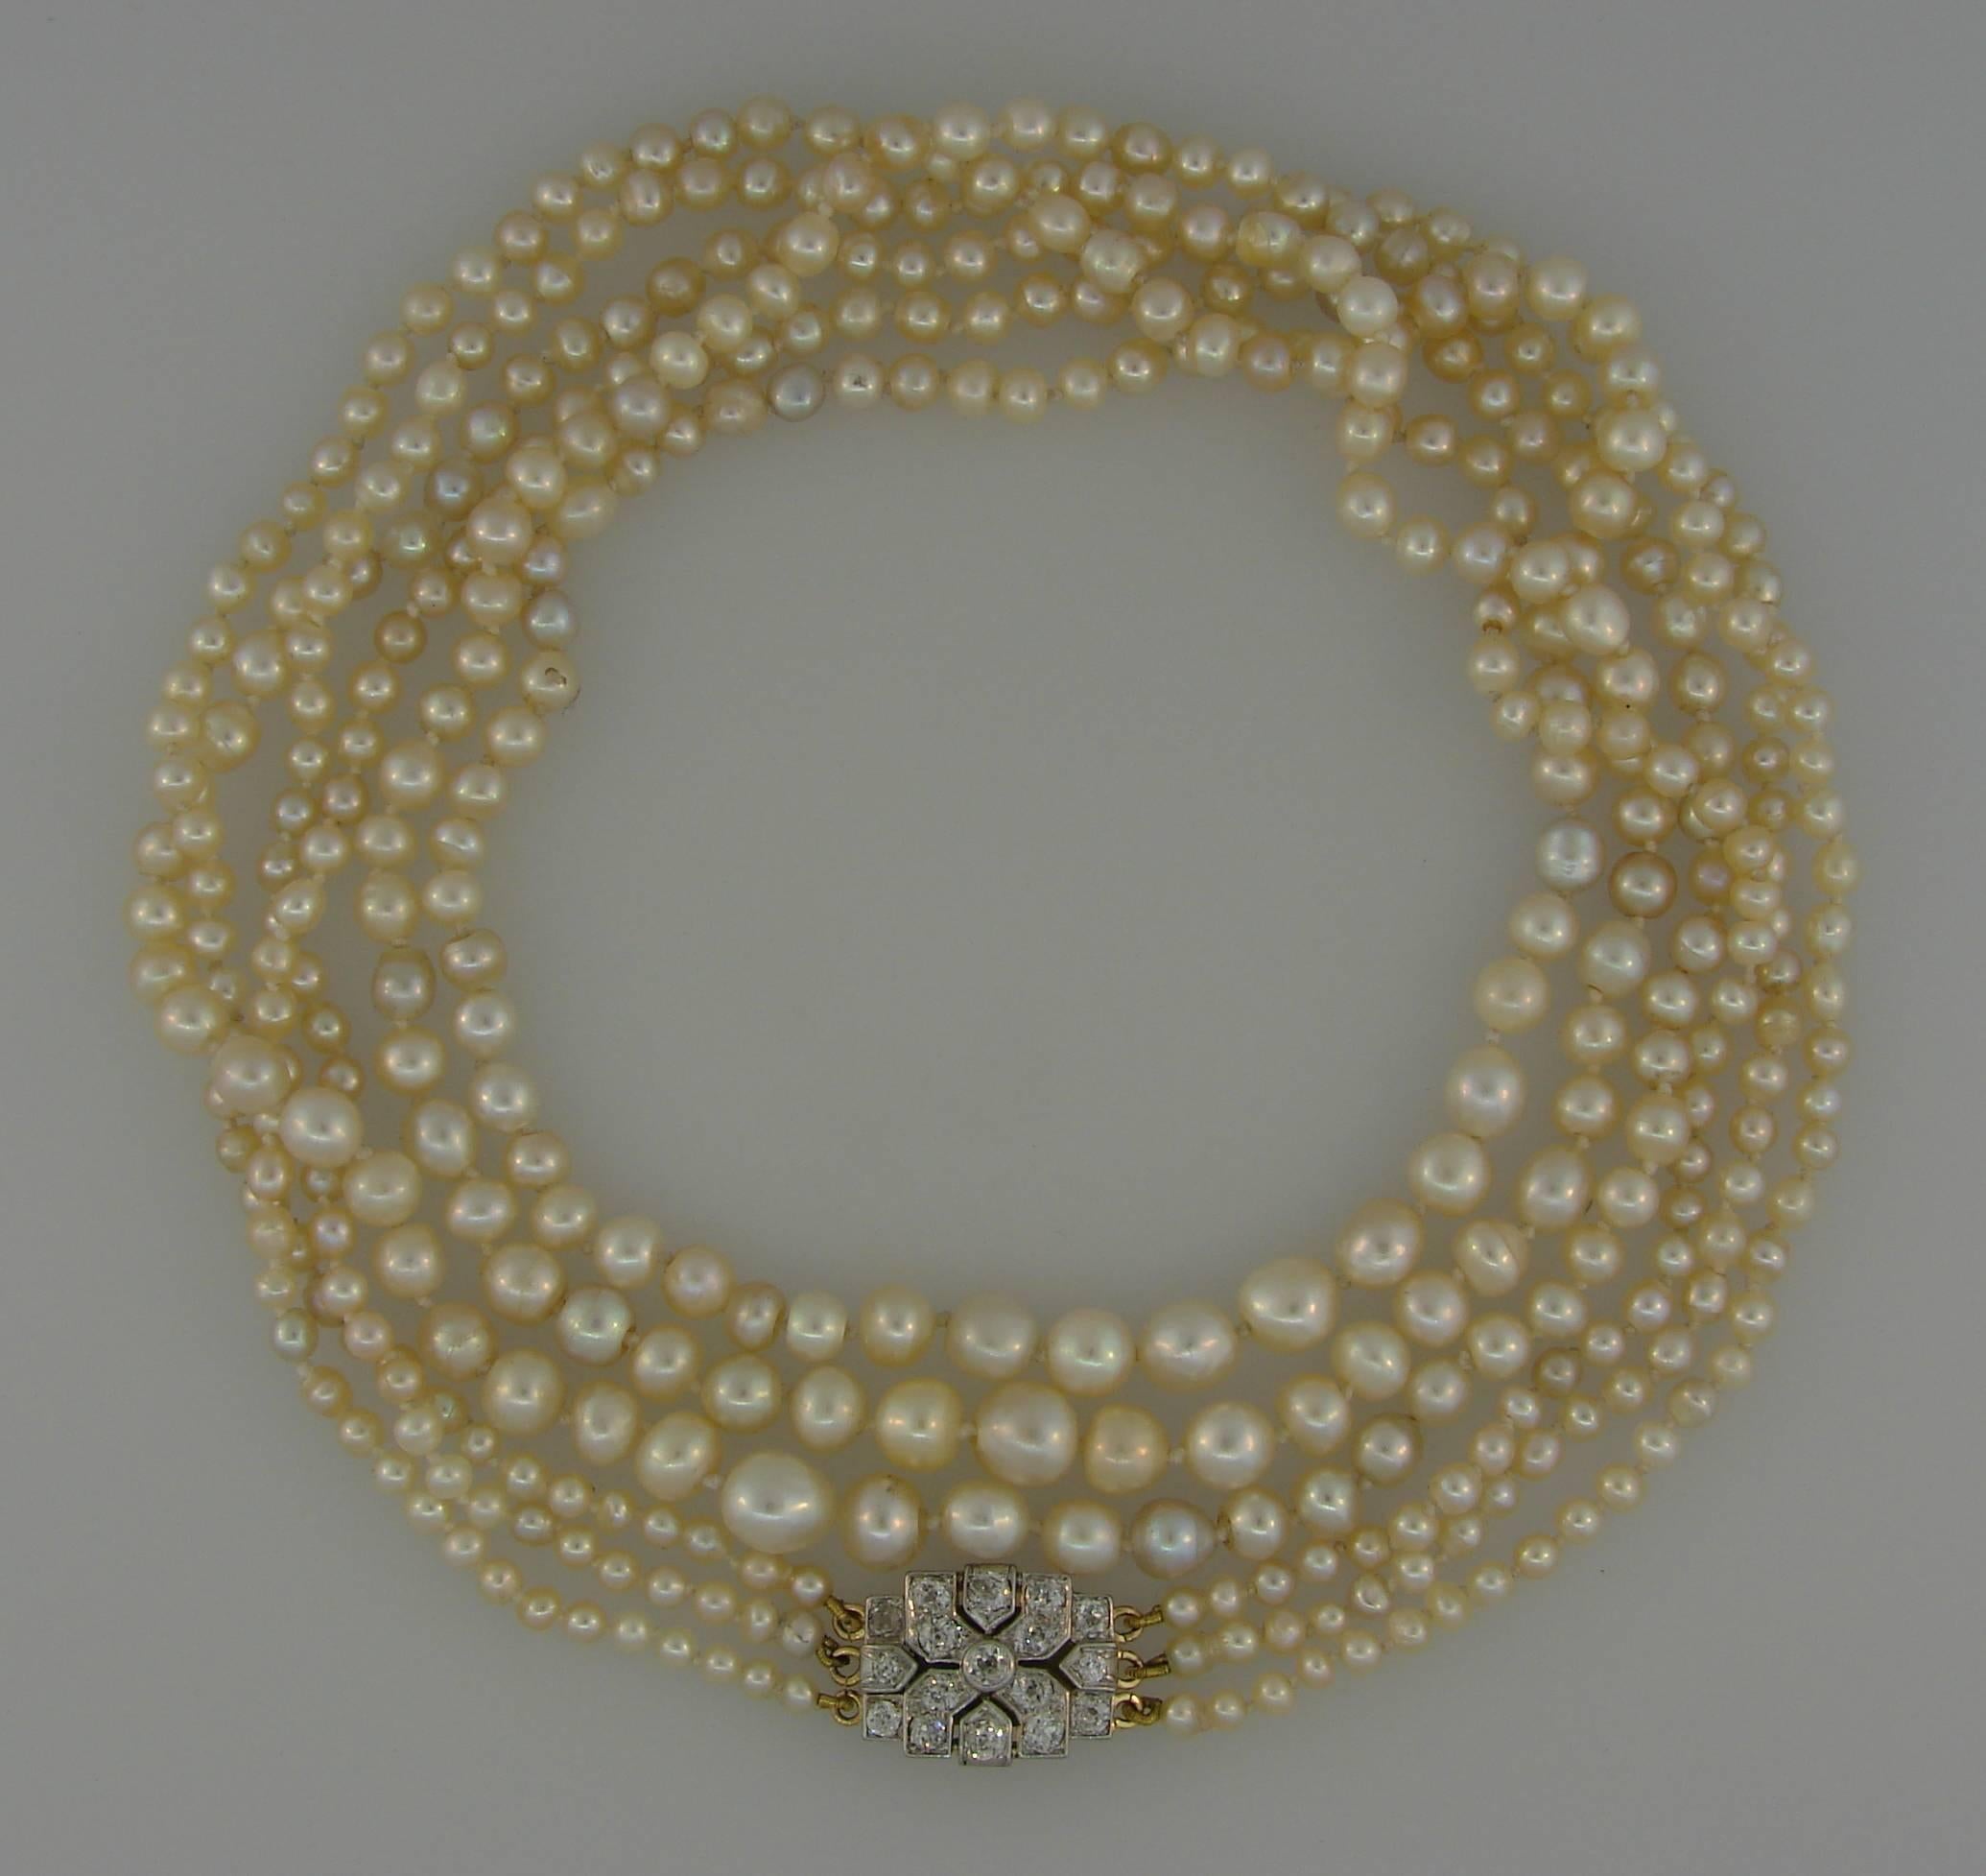 saltwater pearls necklace